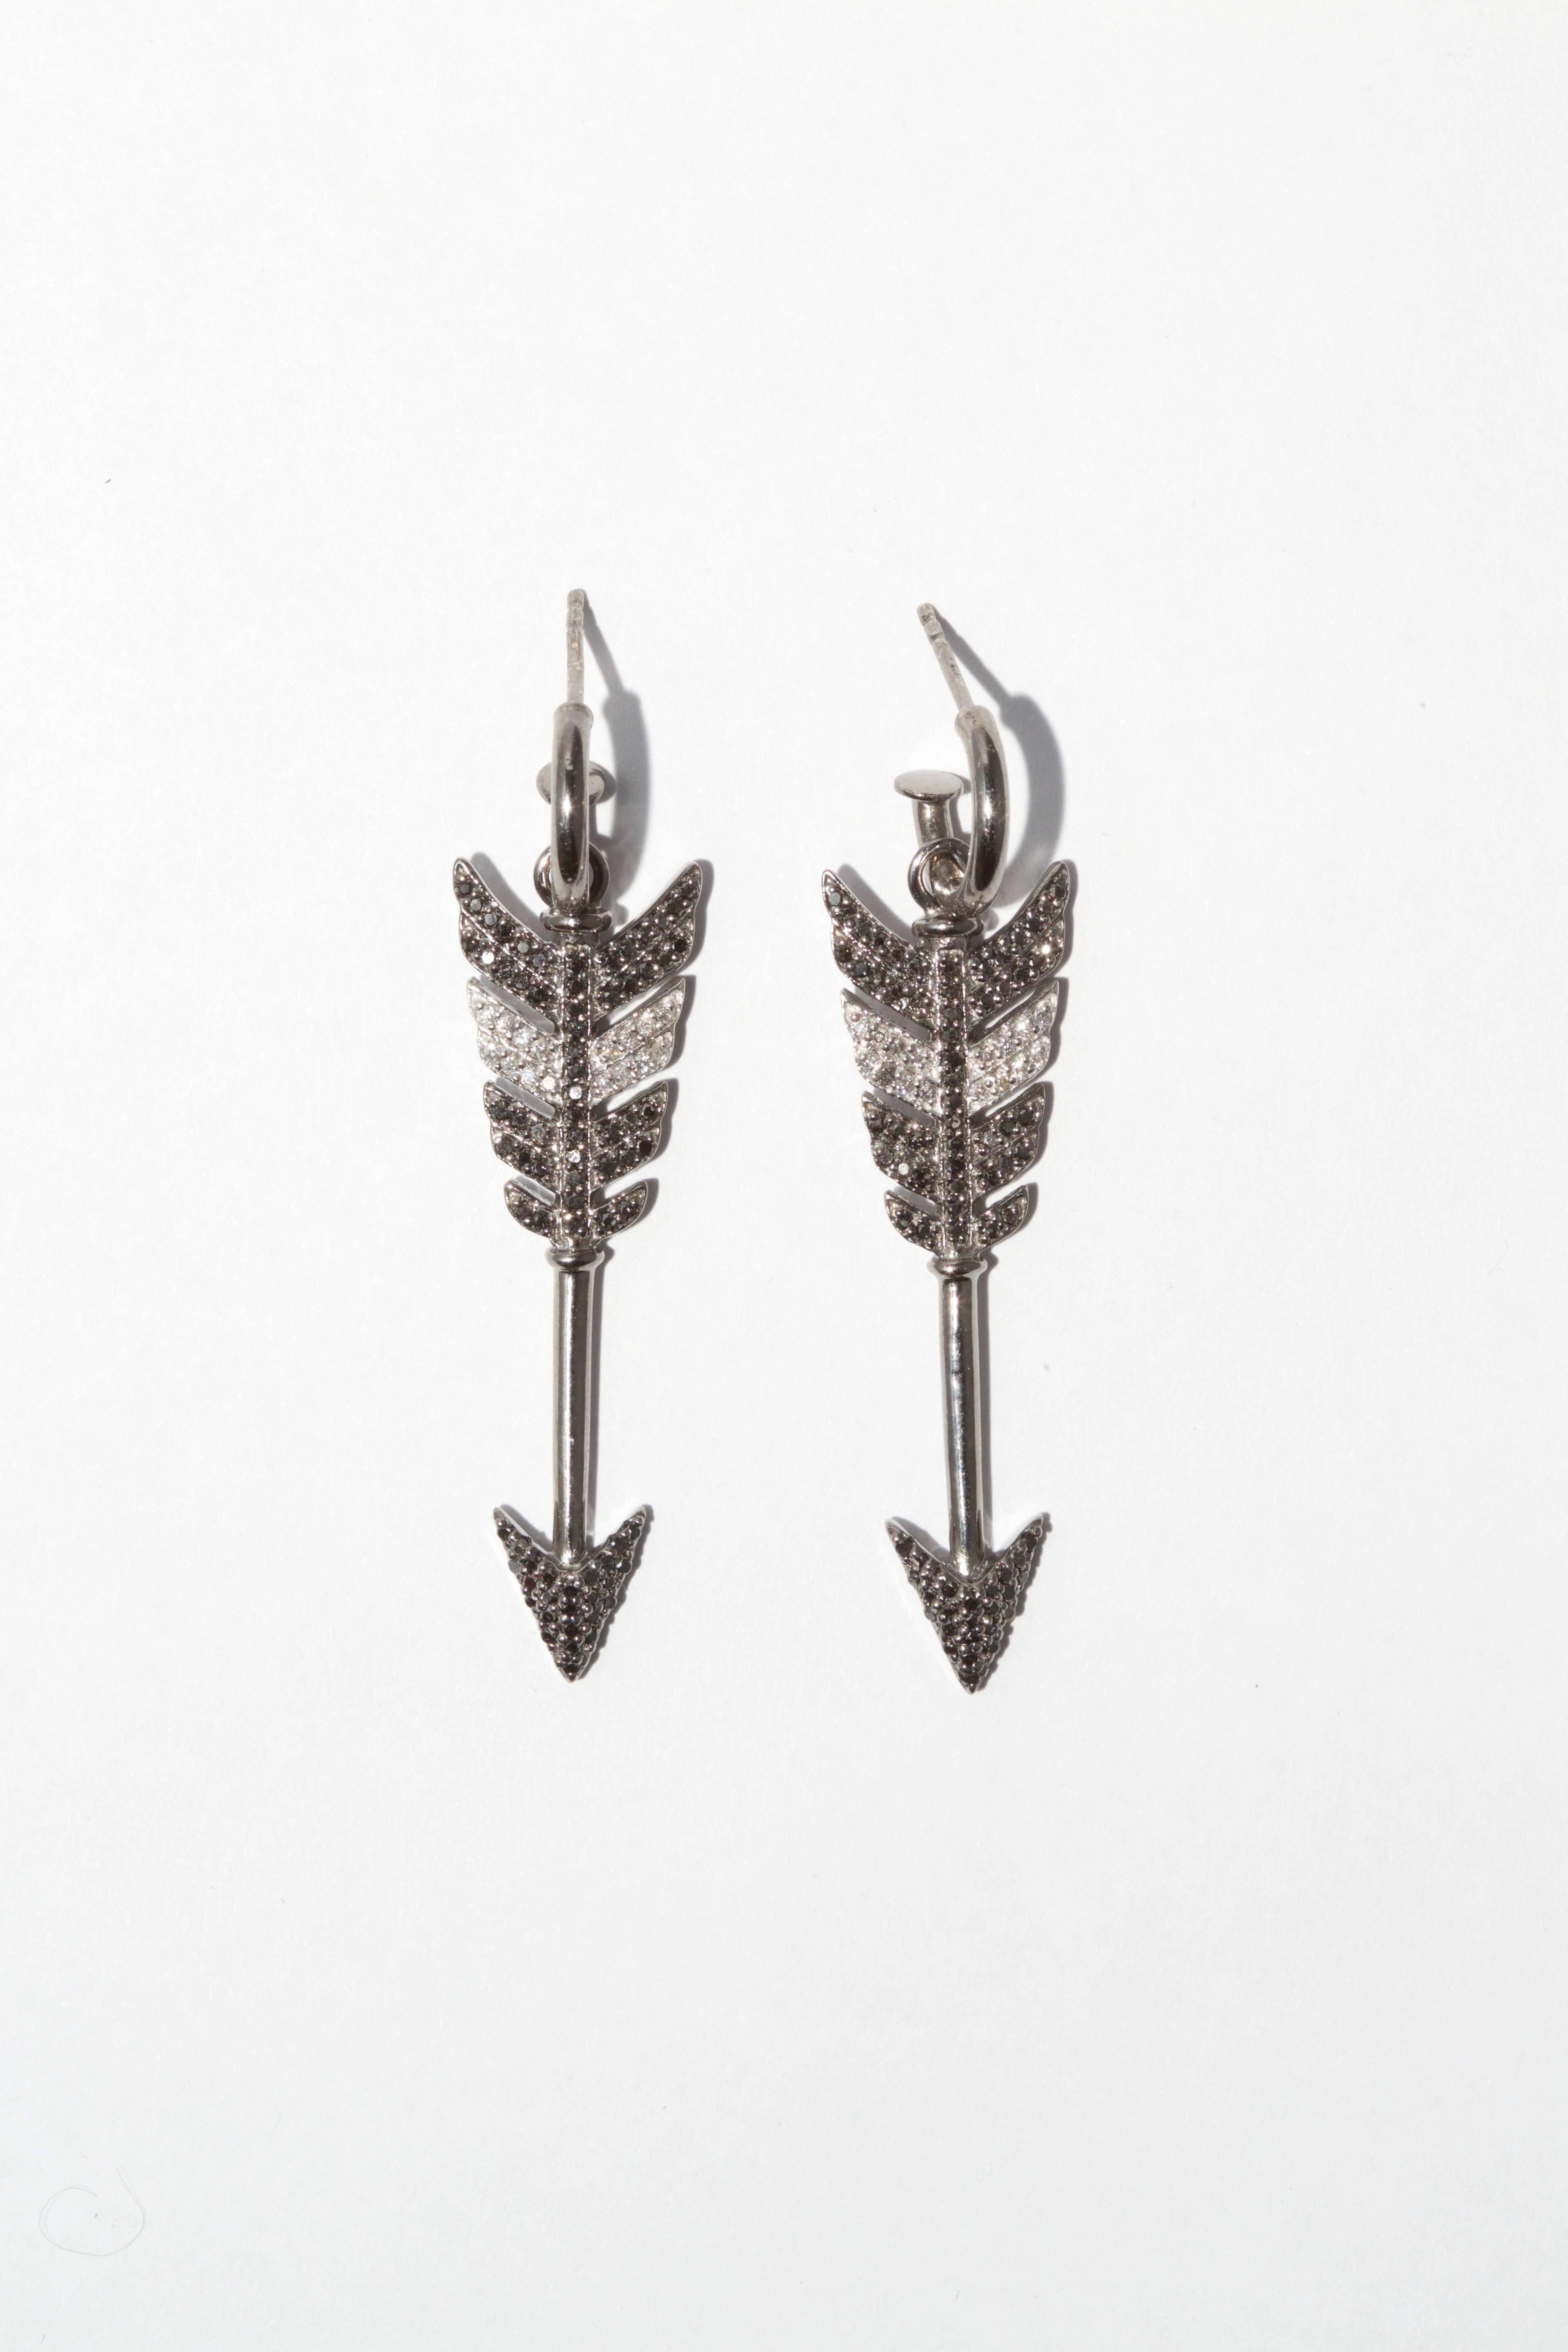 Large Black Diamond Arrow Earrings. Black and white diamonds, sterling silver with black rhodium plate.
Jade Jagger’s new Arrow collection, with a design lineage that follows on from the the best-selling “Wing” Collection she created for Garrard,